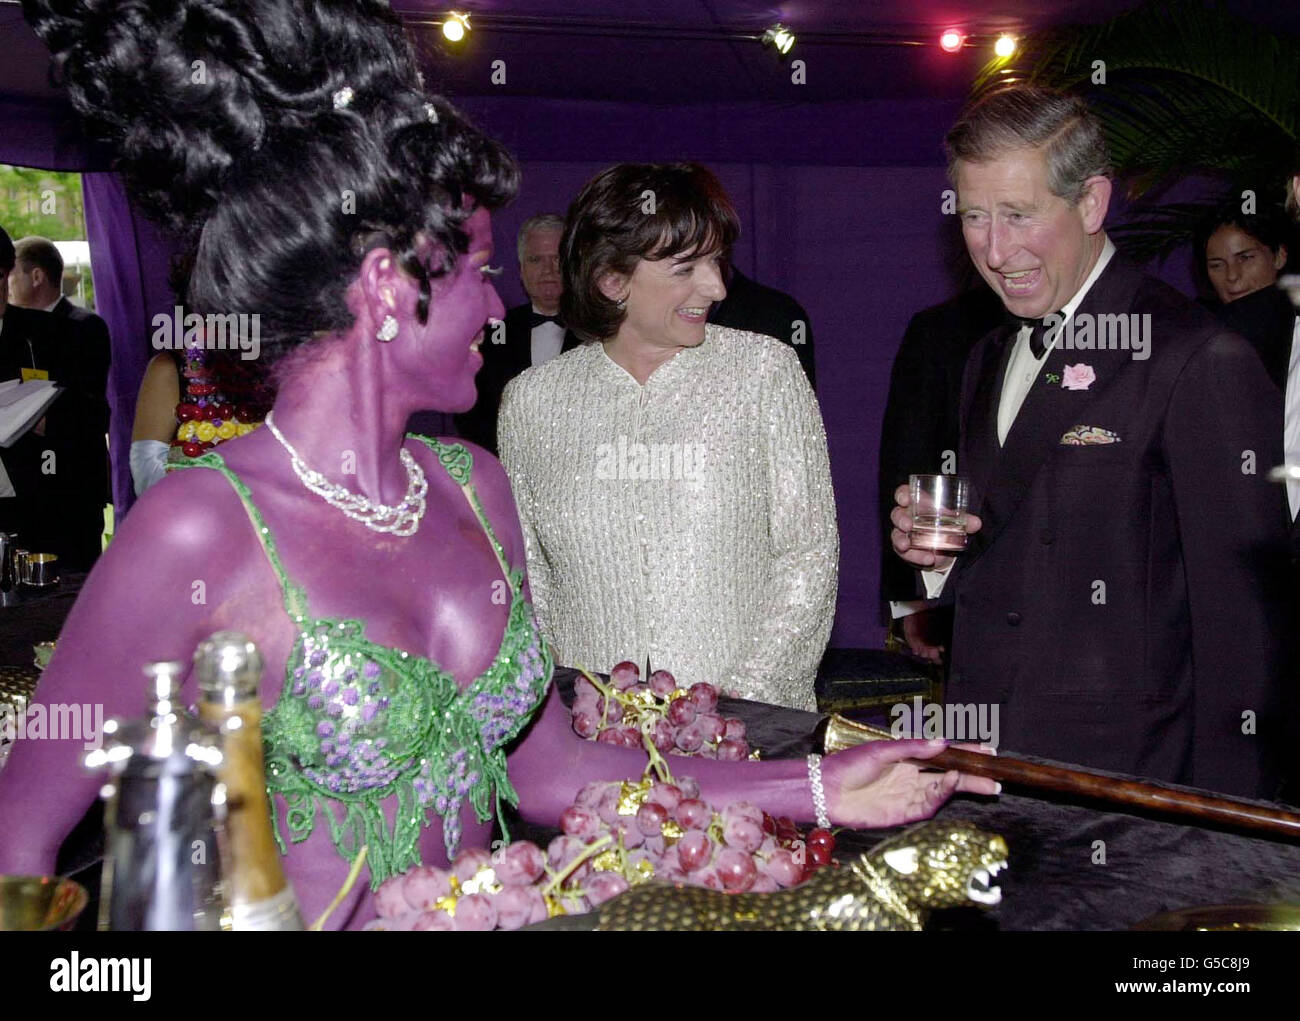 The Prince of Wales and Rosa Monckton (centre) laugh at Russian model Svetlana Dembrikaia at the 'Its Fashion' charity dinner at Waddesdon Manor, Buckinghamshire. * The Prince burst out laughing when he realised the 22-year-old model, who was covered in purple makeup and poking out through the centre of the table, was real . The dinner, attended by fashion designers, celebrities and models, is in aid of the Macmillan Cancer Relief charity. Stock Photo